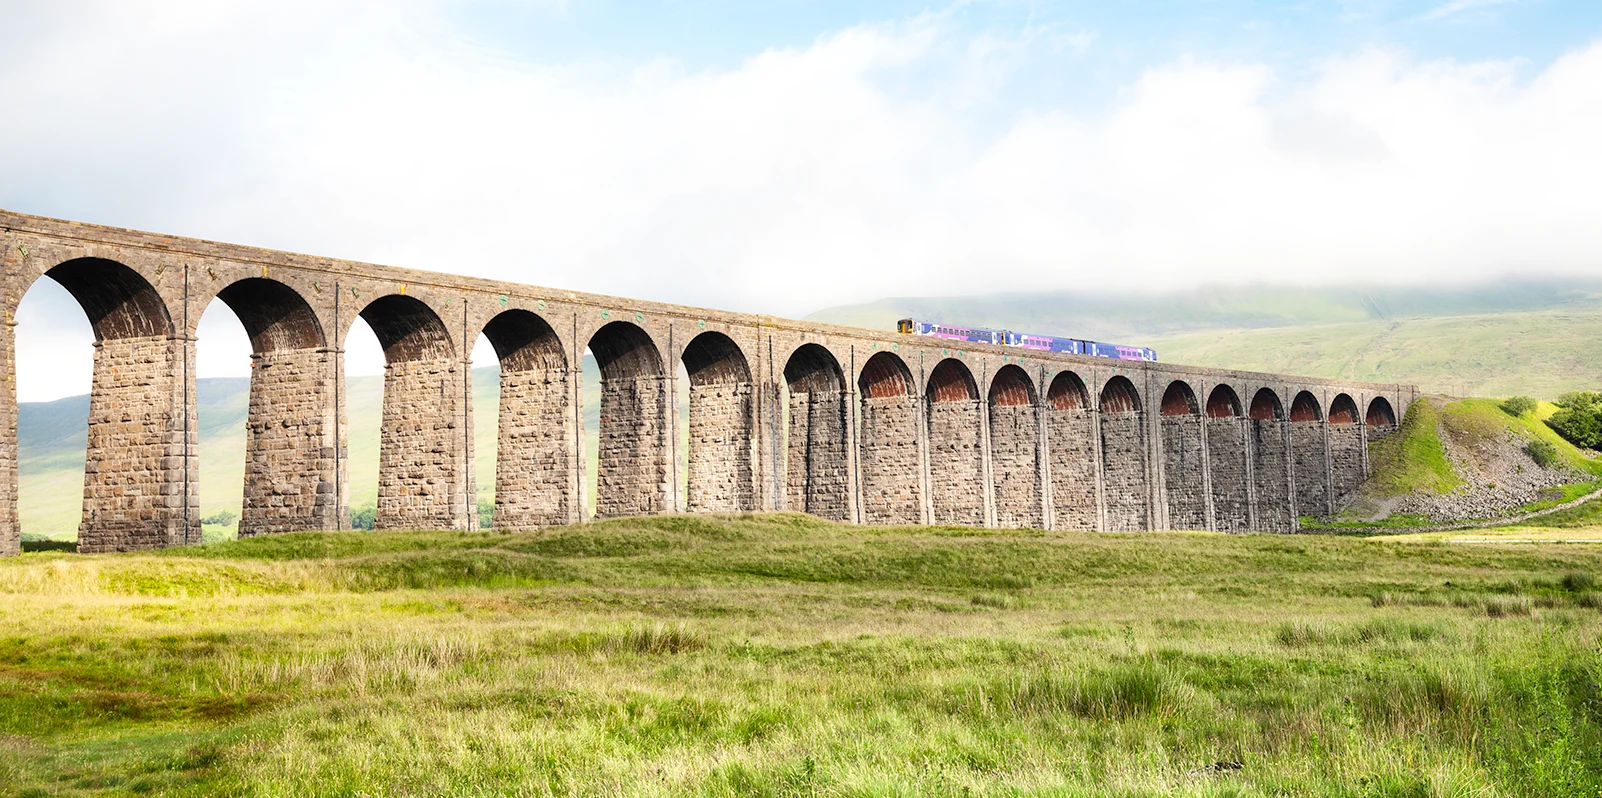 A train crossing the Ribblehead viaduct in Yorkshire